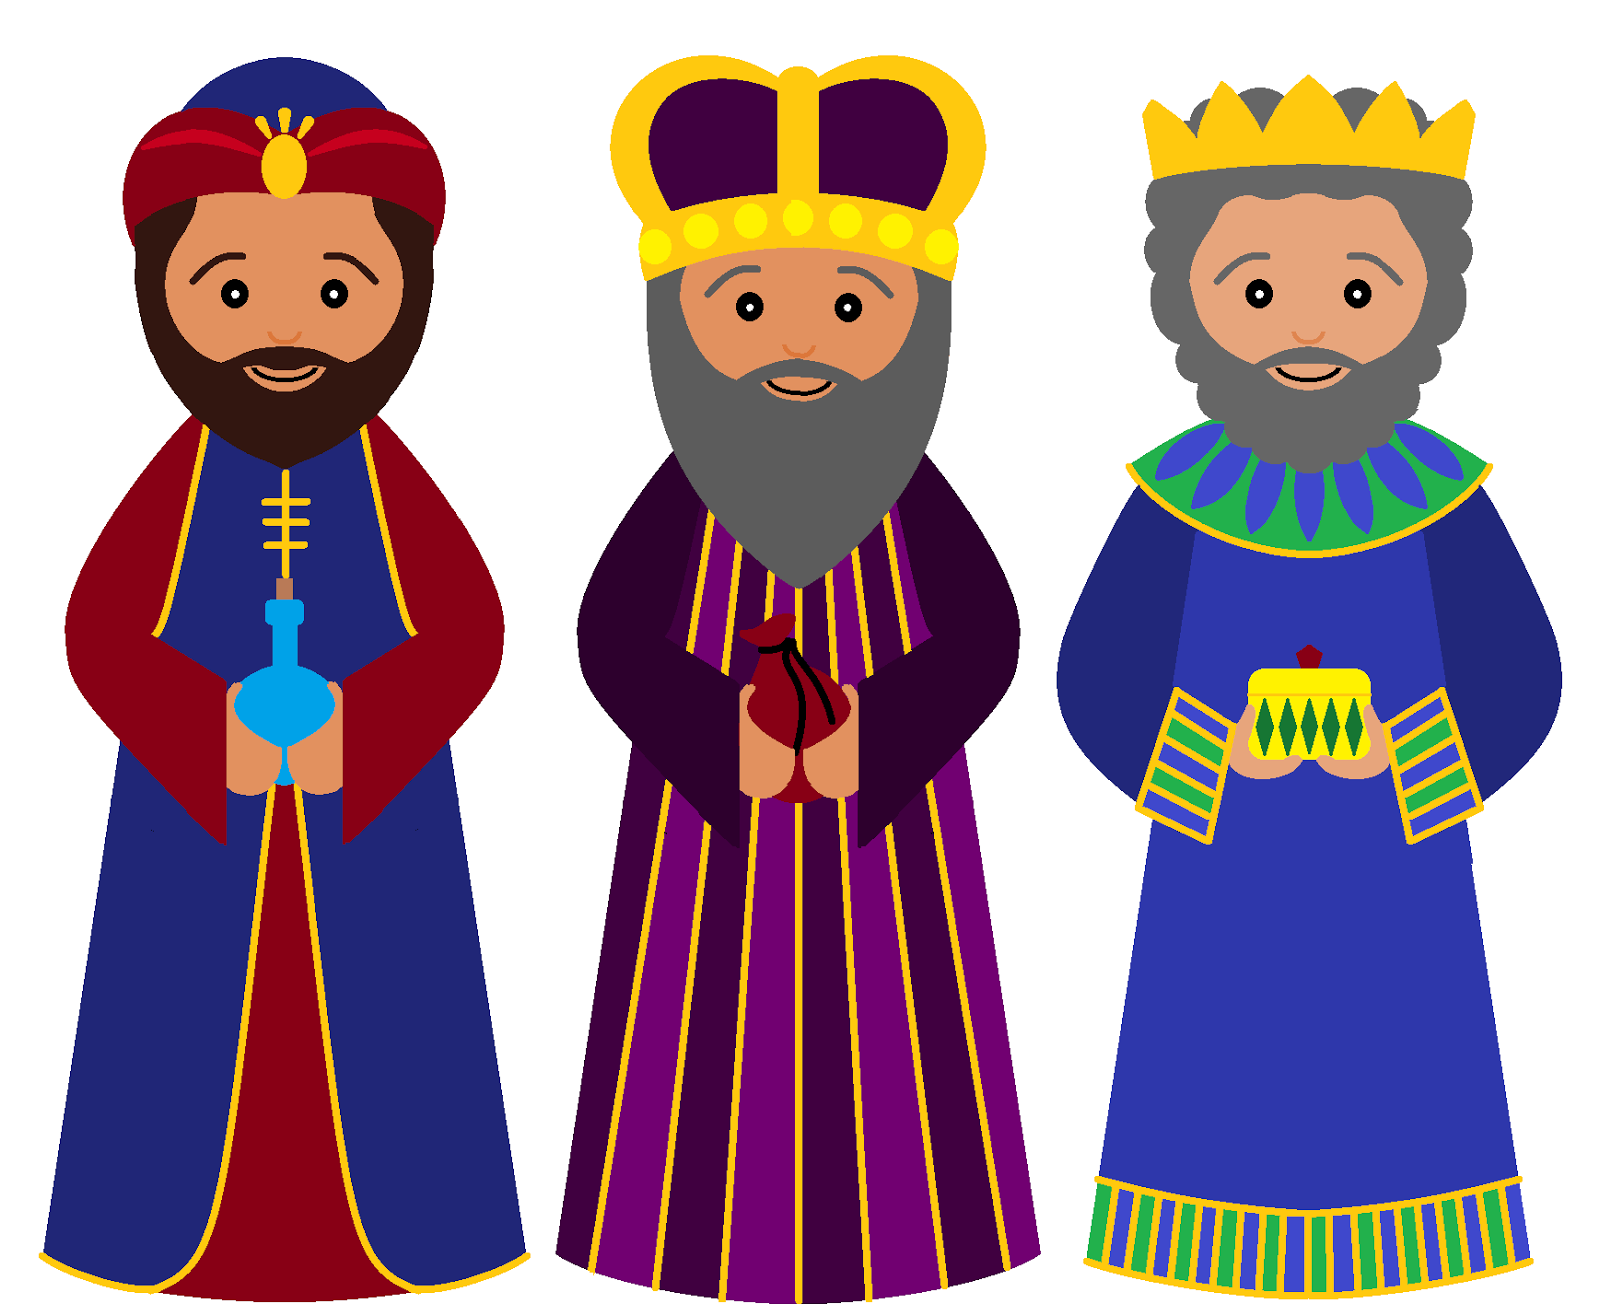 Wise Men Clip Art 18 Pics In Our Database For Christmas Wise Men Clip